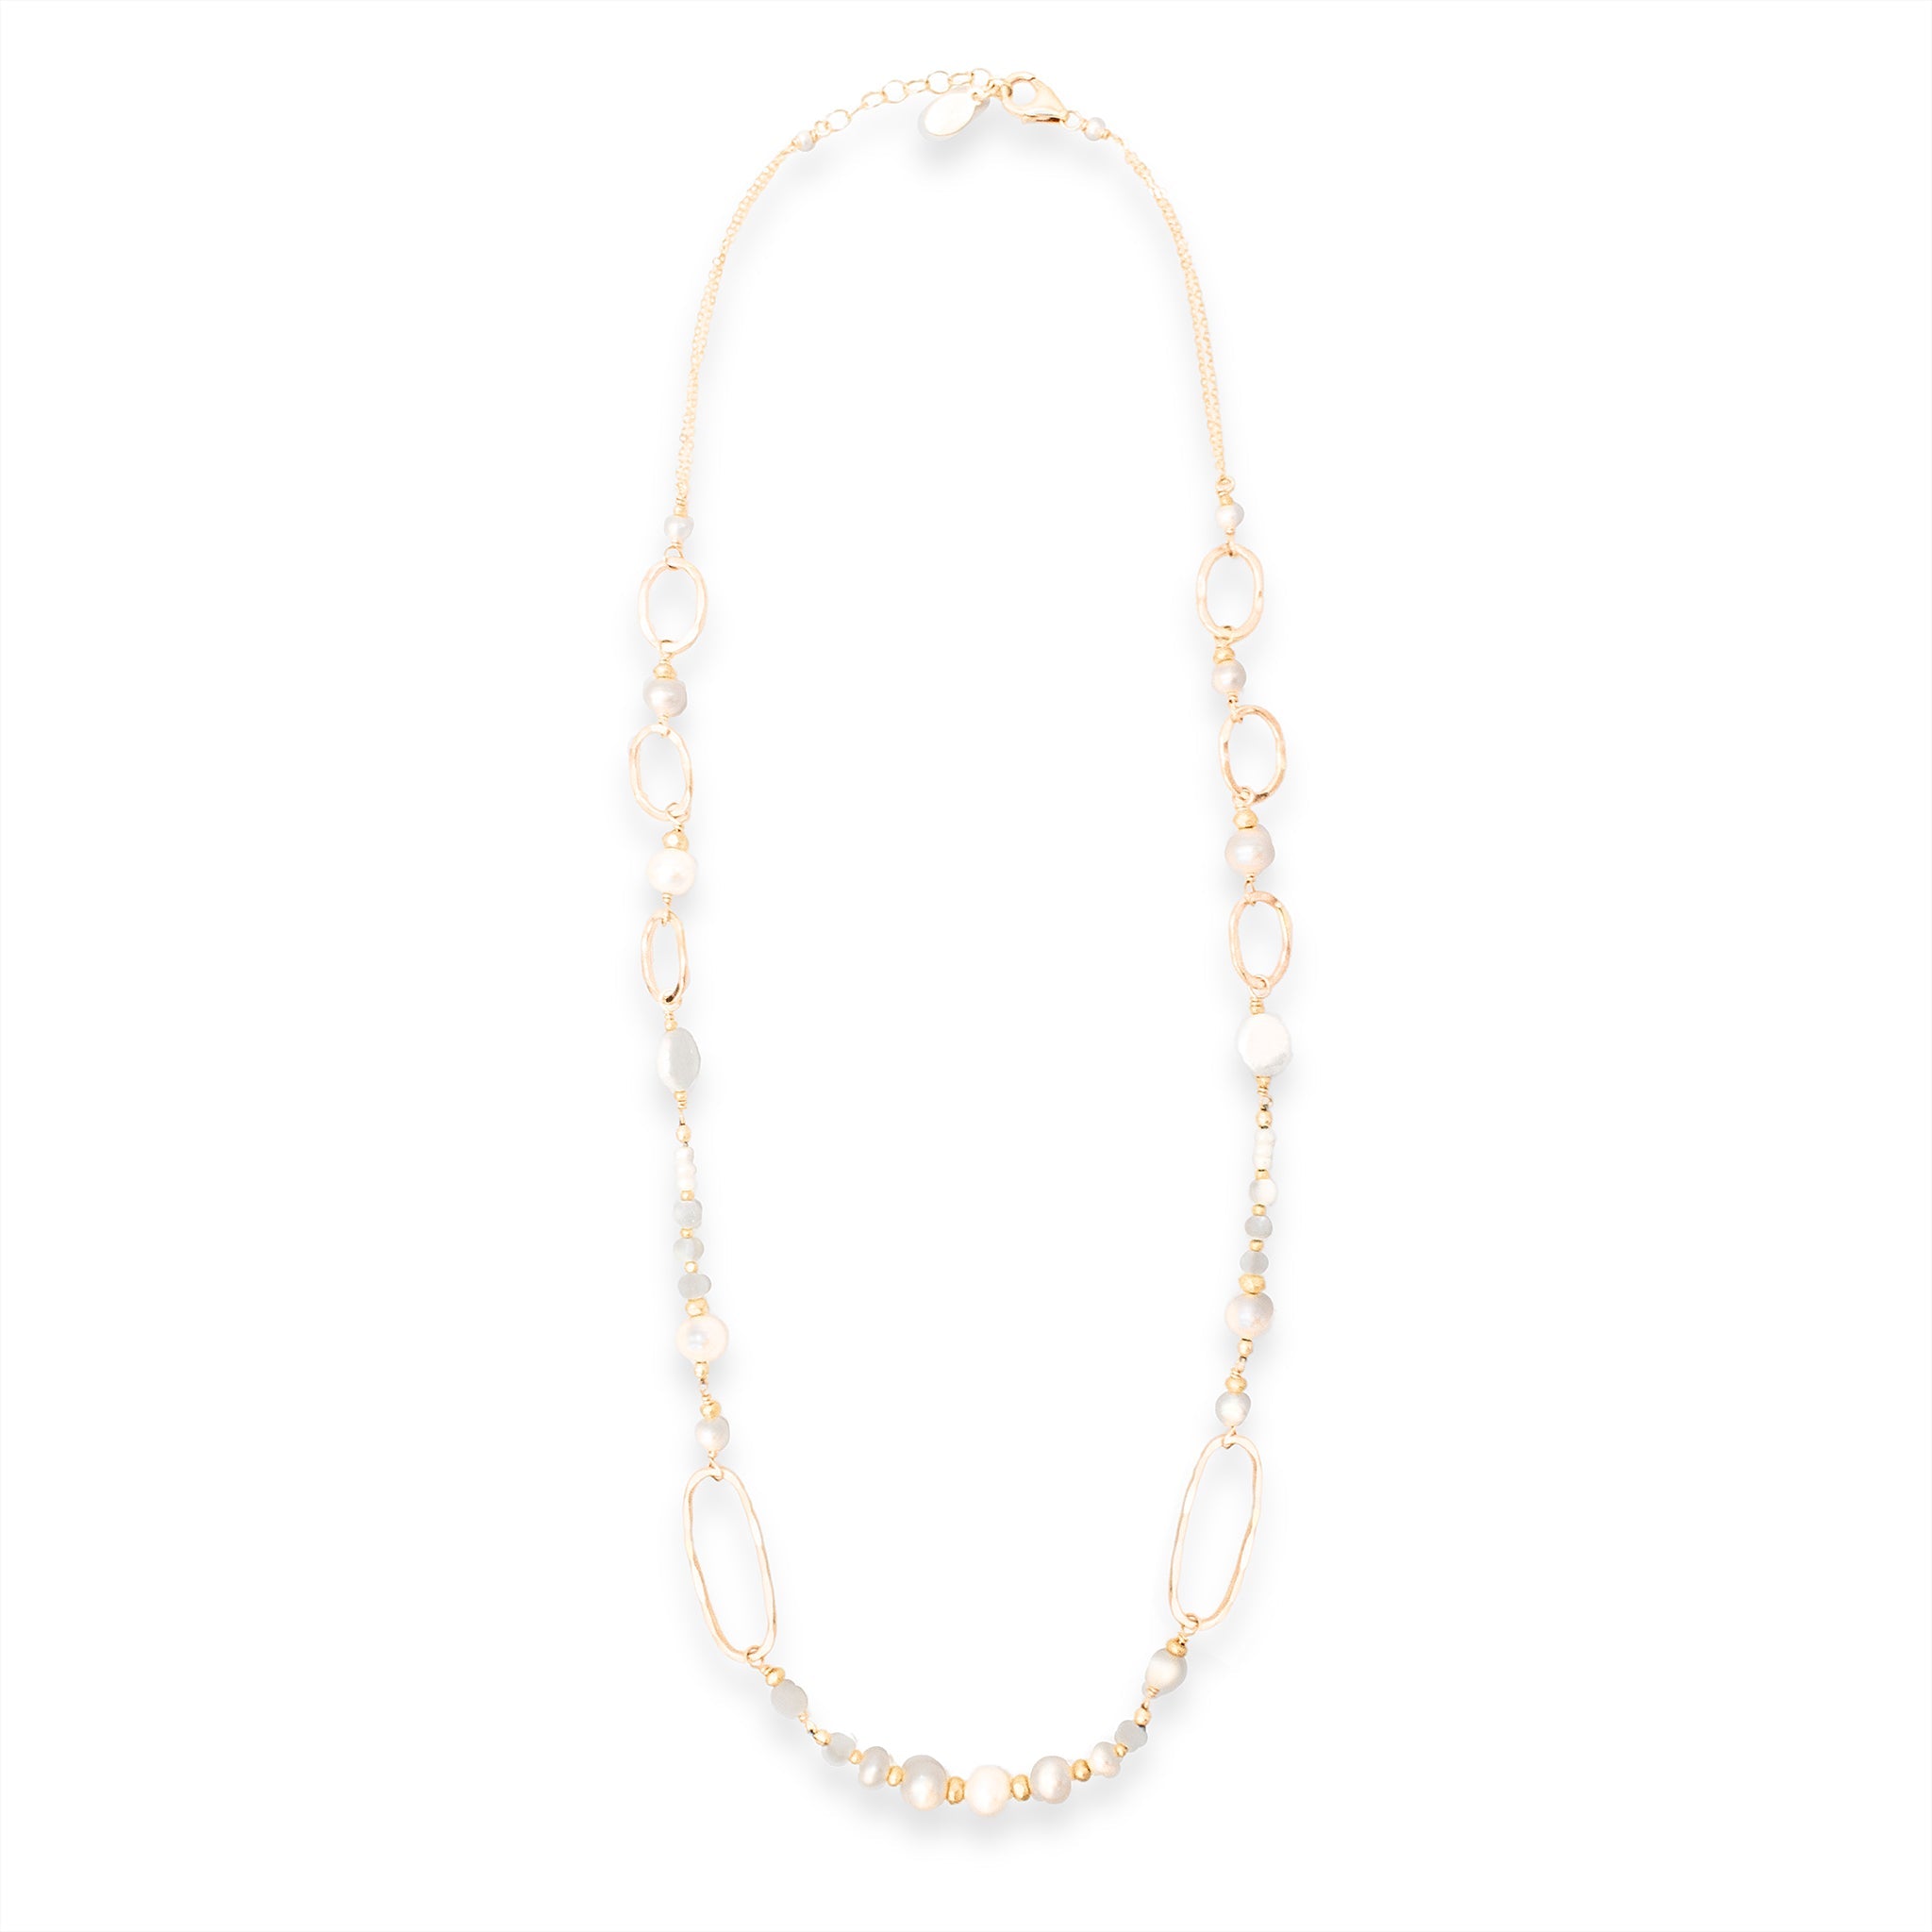 Golden Linked Pearl Necklace - Necklaces